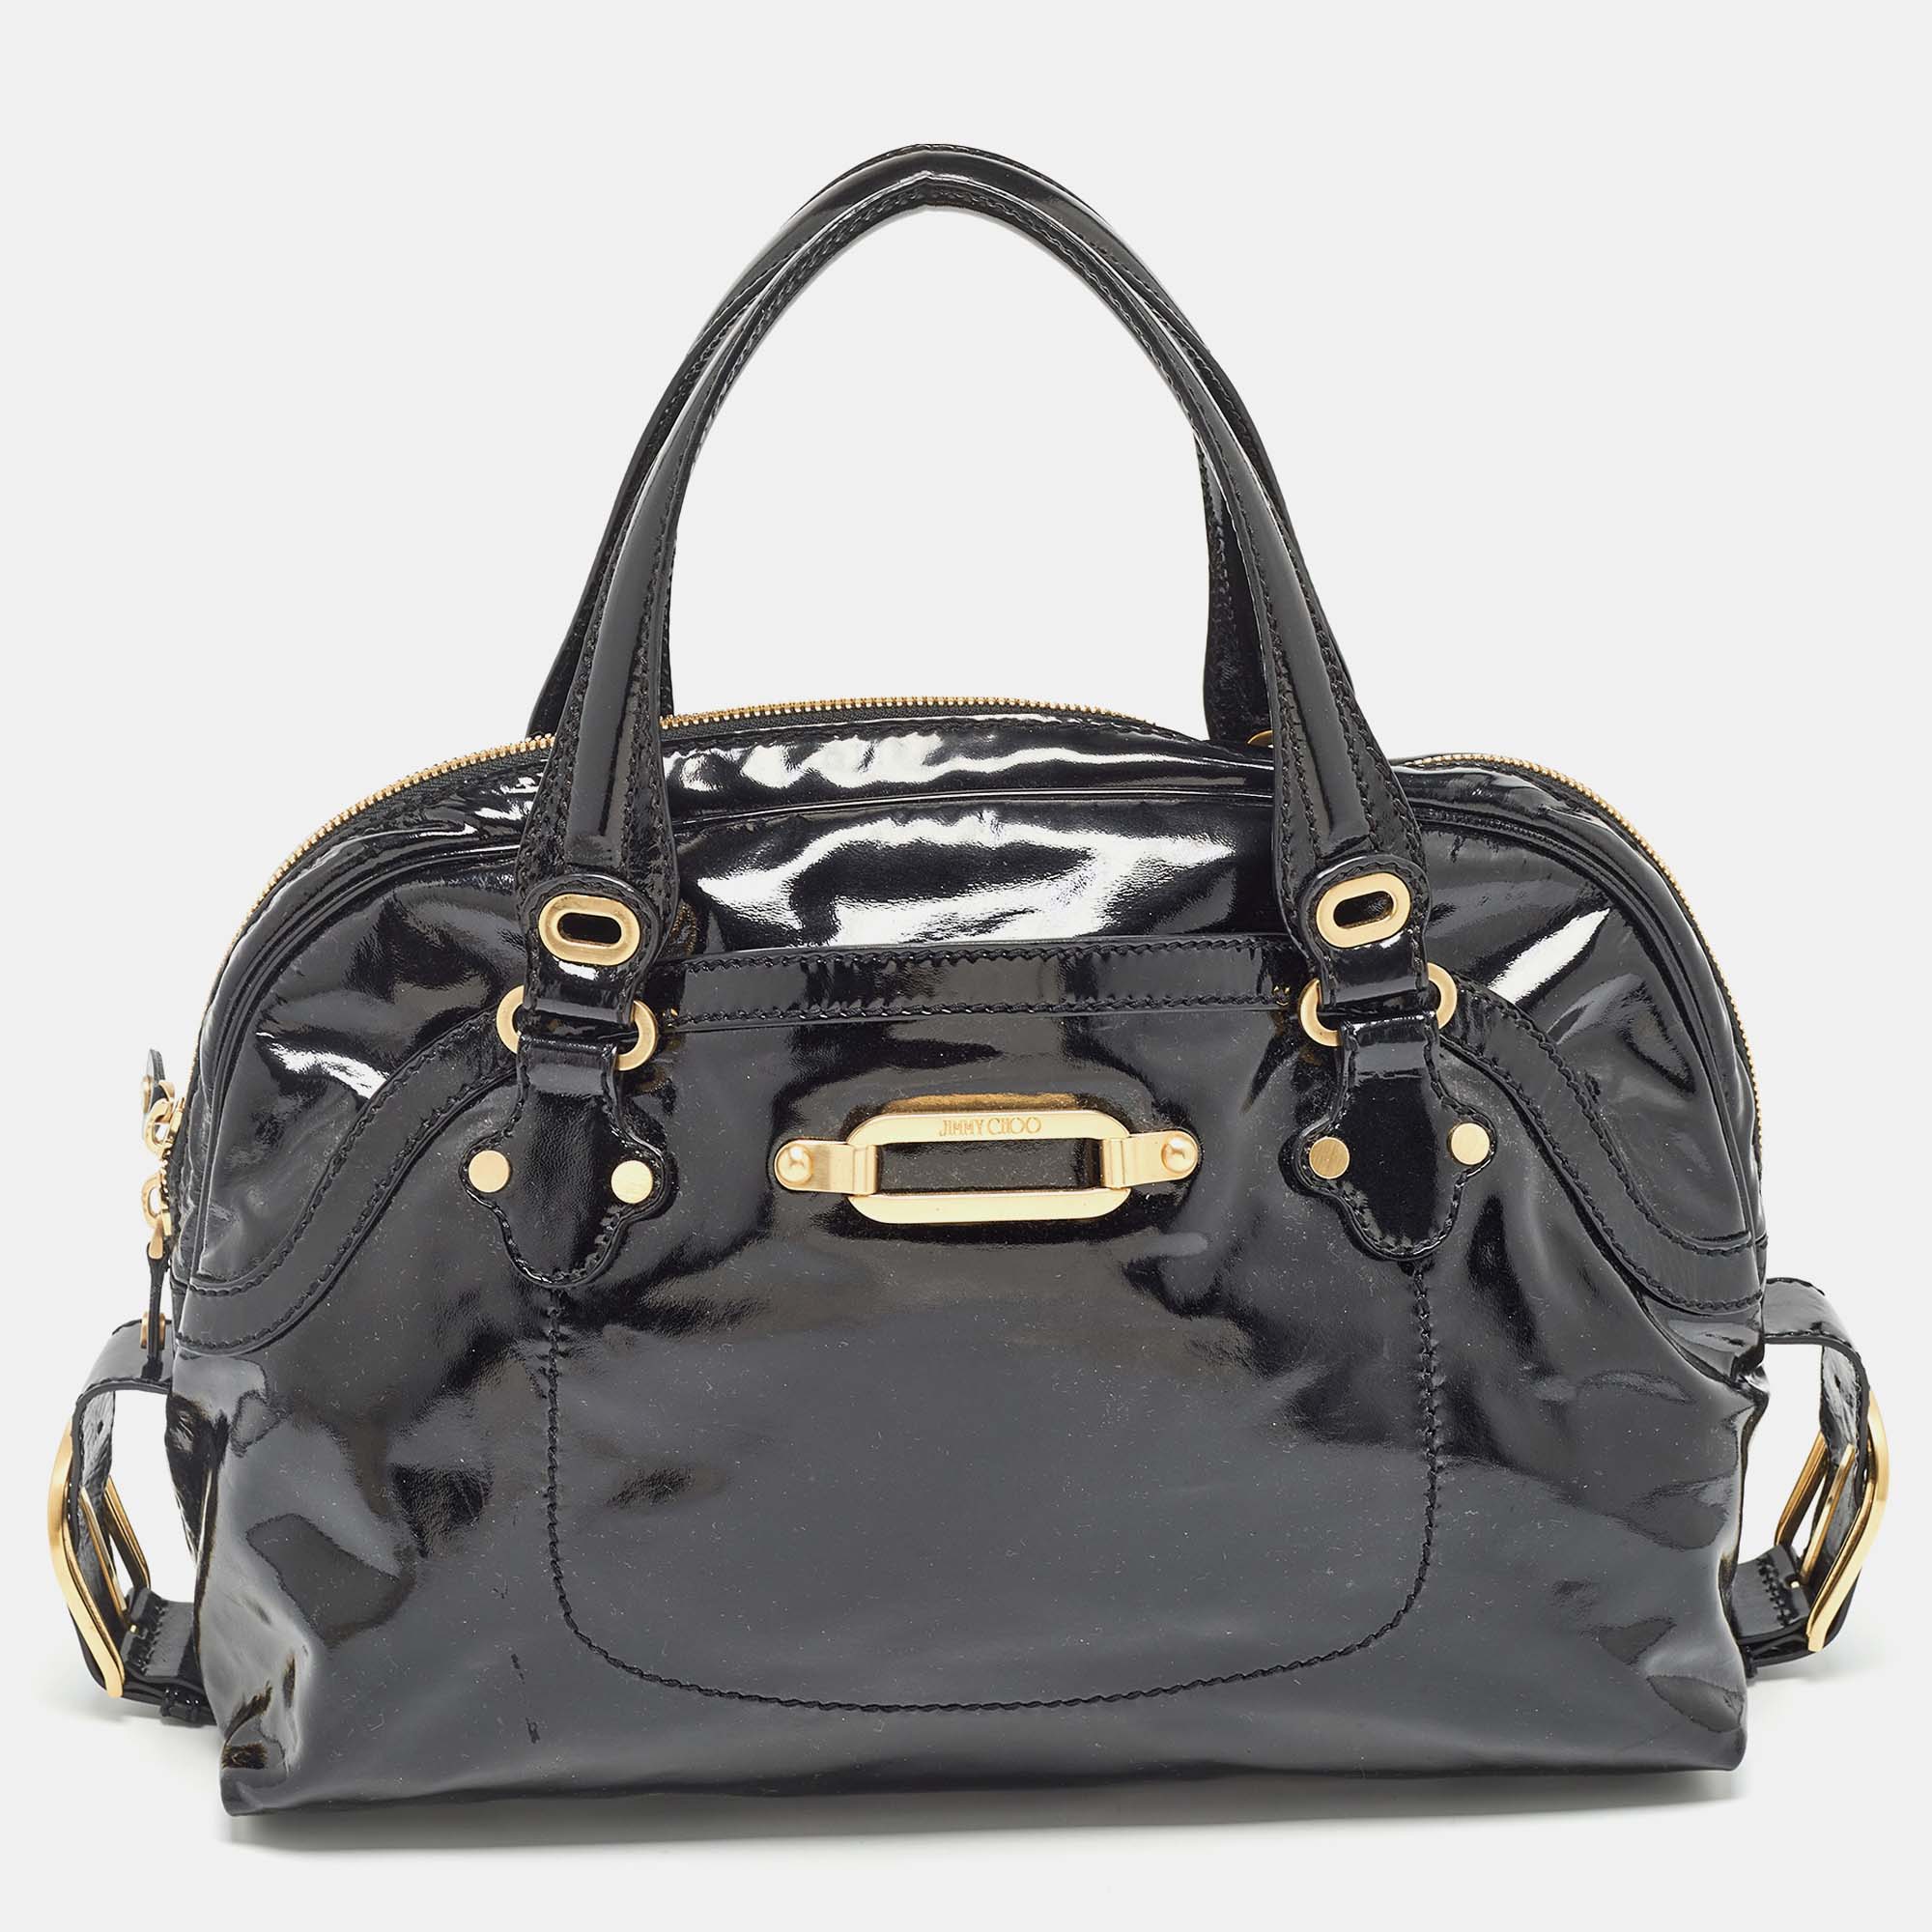 

Jimmy Choo Black Patent Leather Thora Dome Satchel